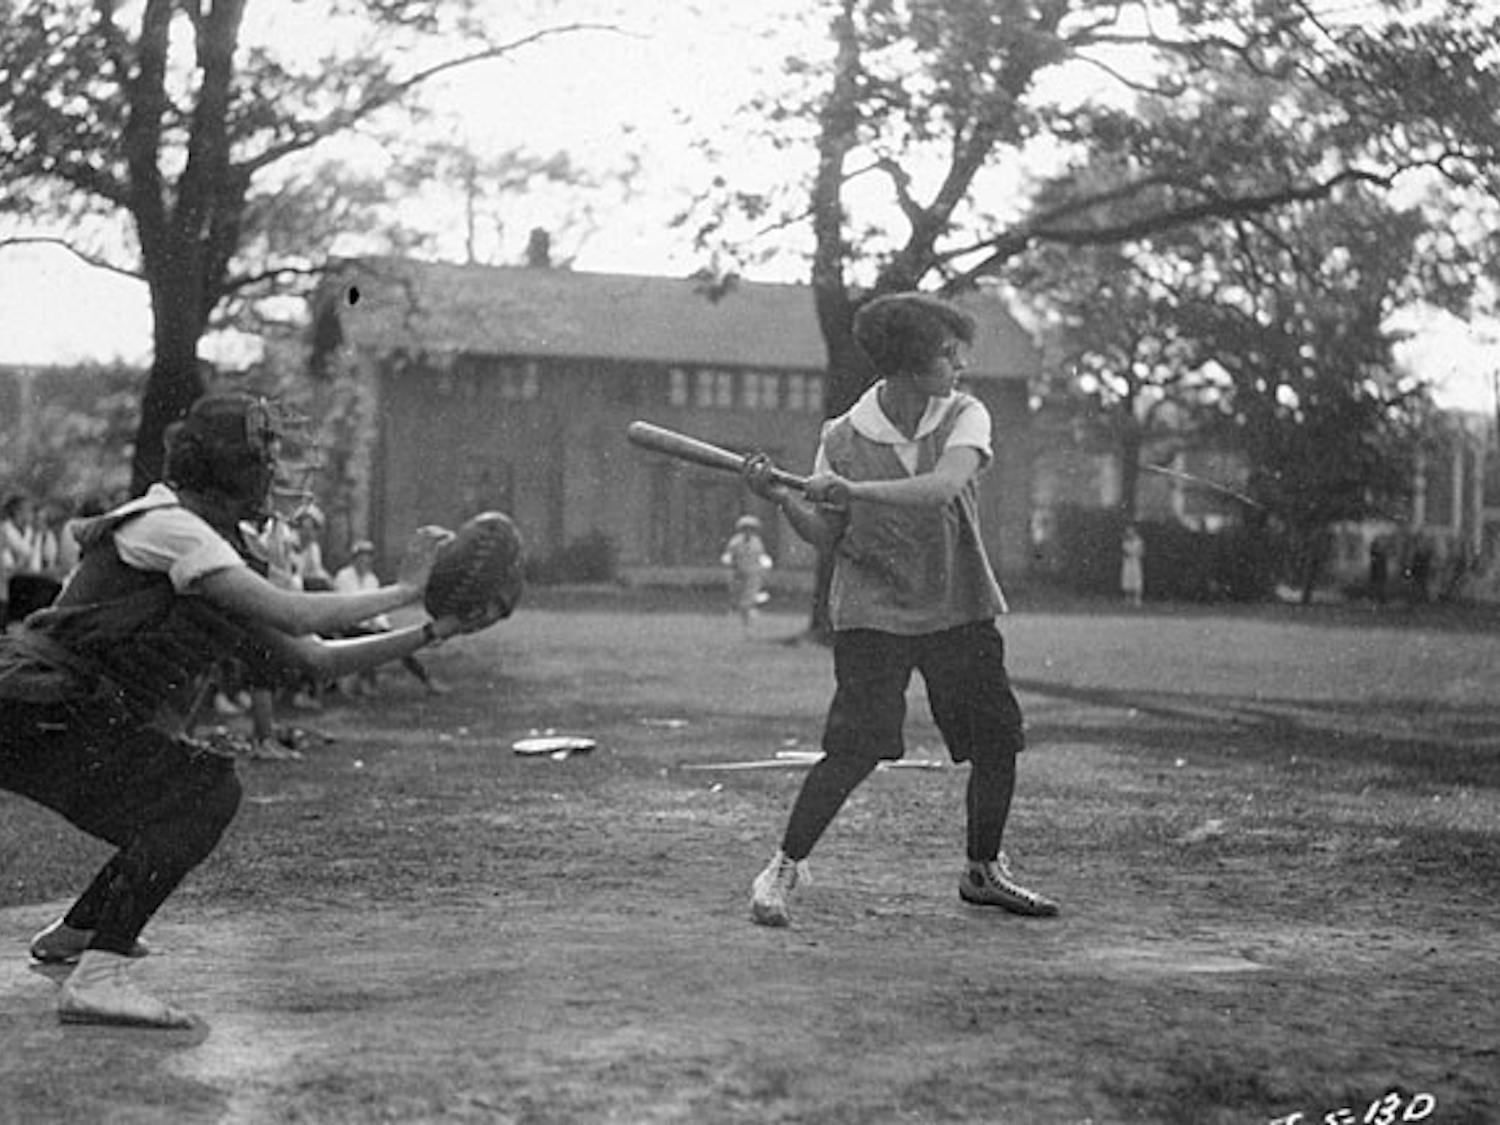 Two women utilize the makeshift baseball facilities UW-Madison had available to students in 1928.